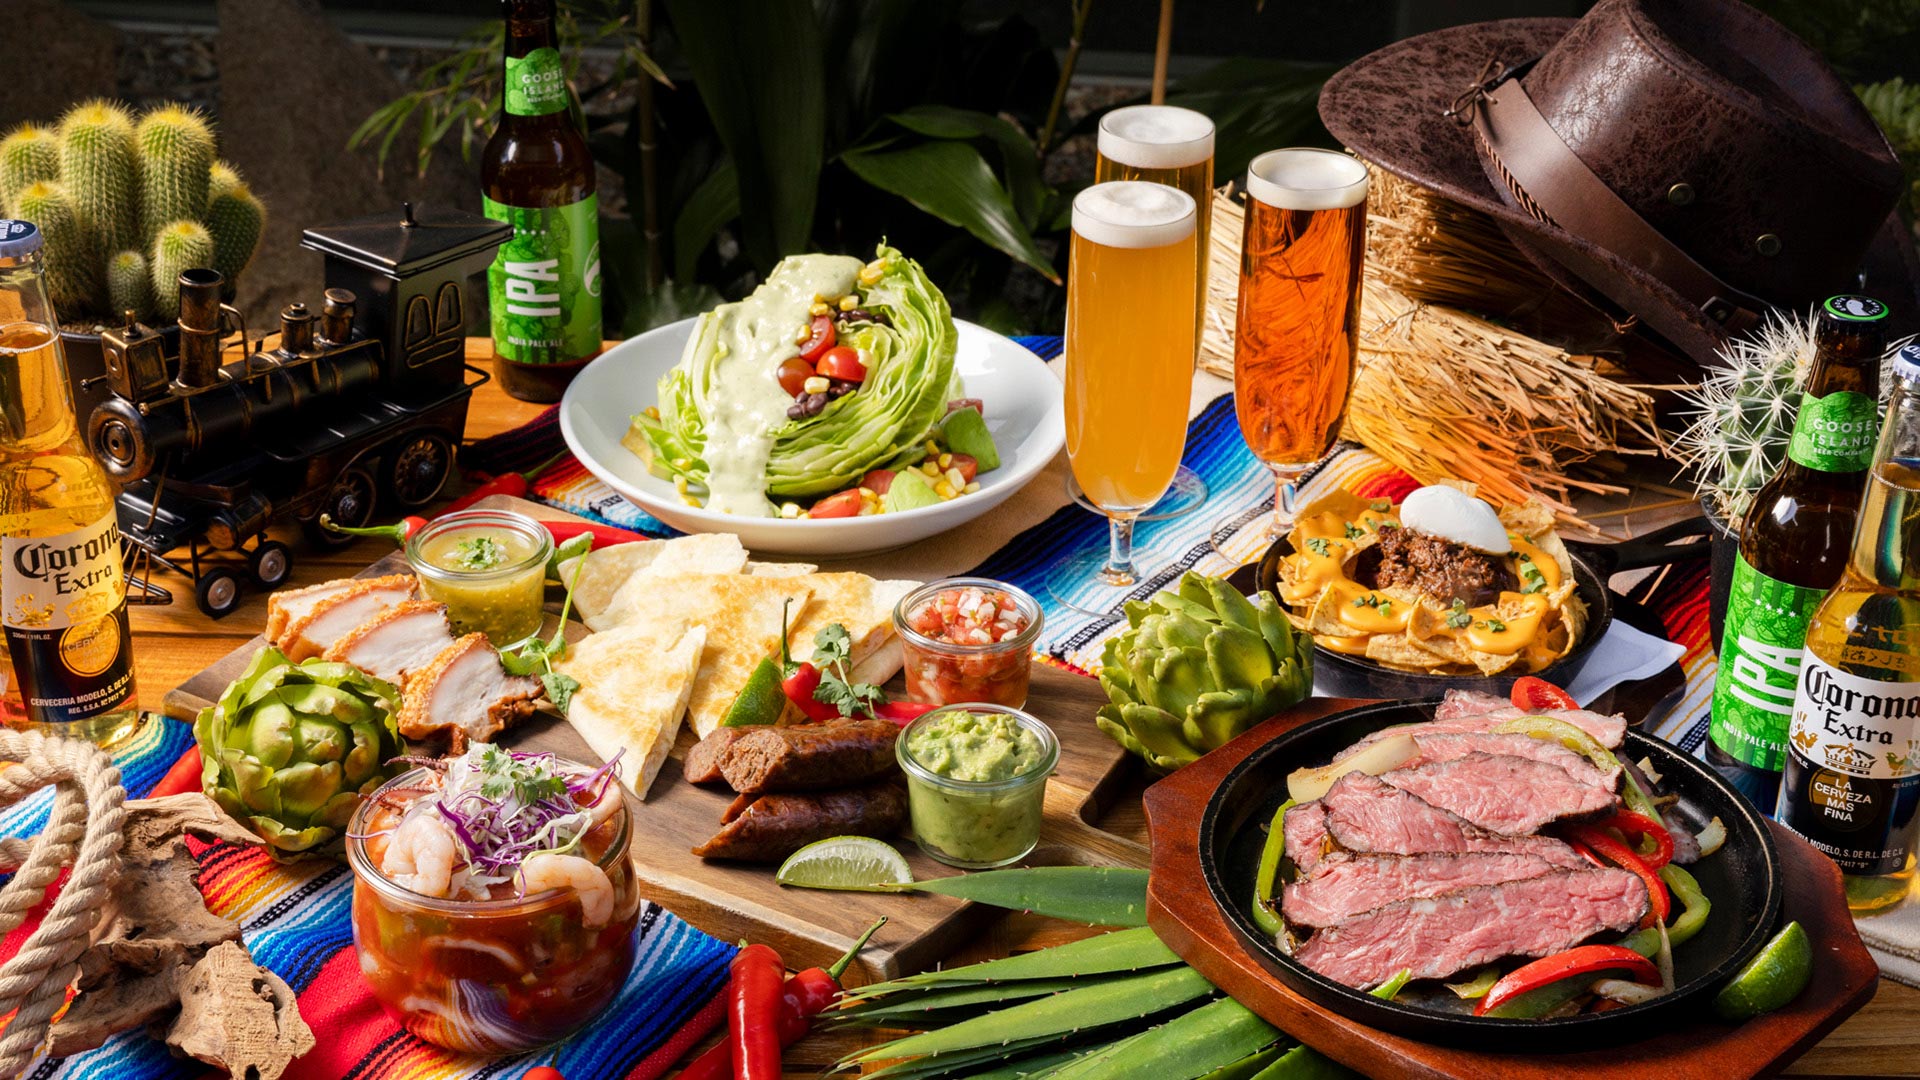 Summer BBQ Dinner – the French Summer &amp; the American: TEXMEX